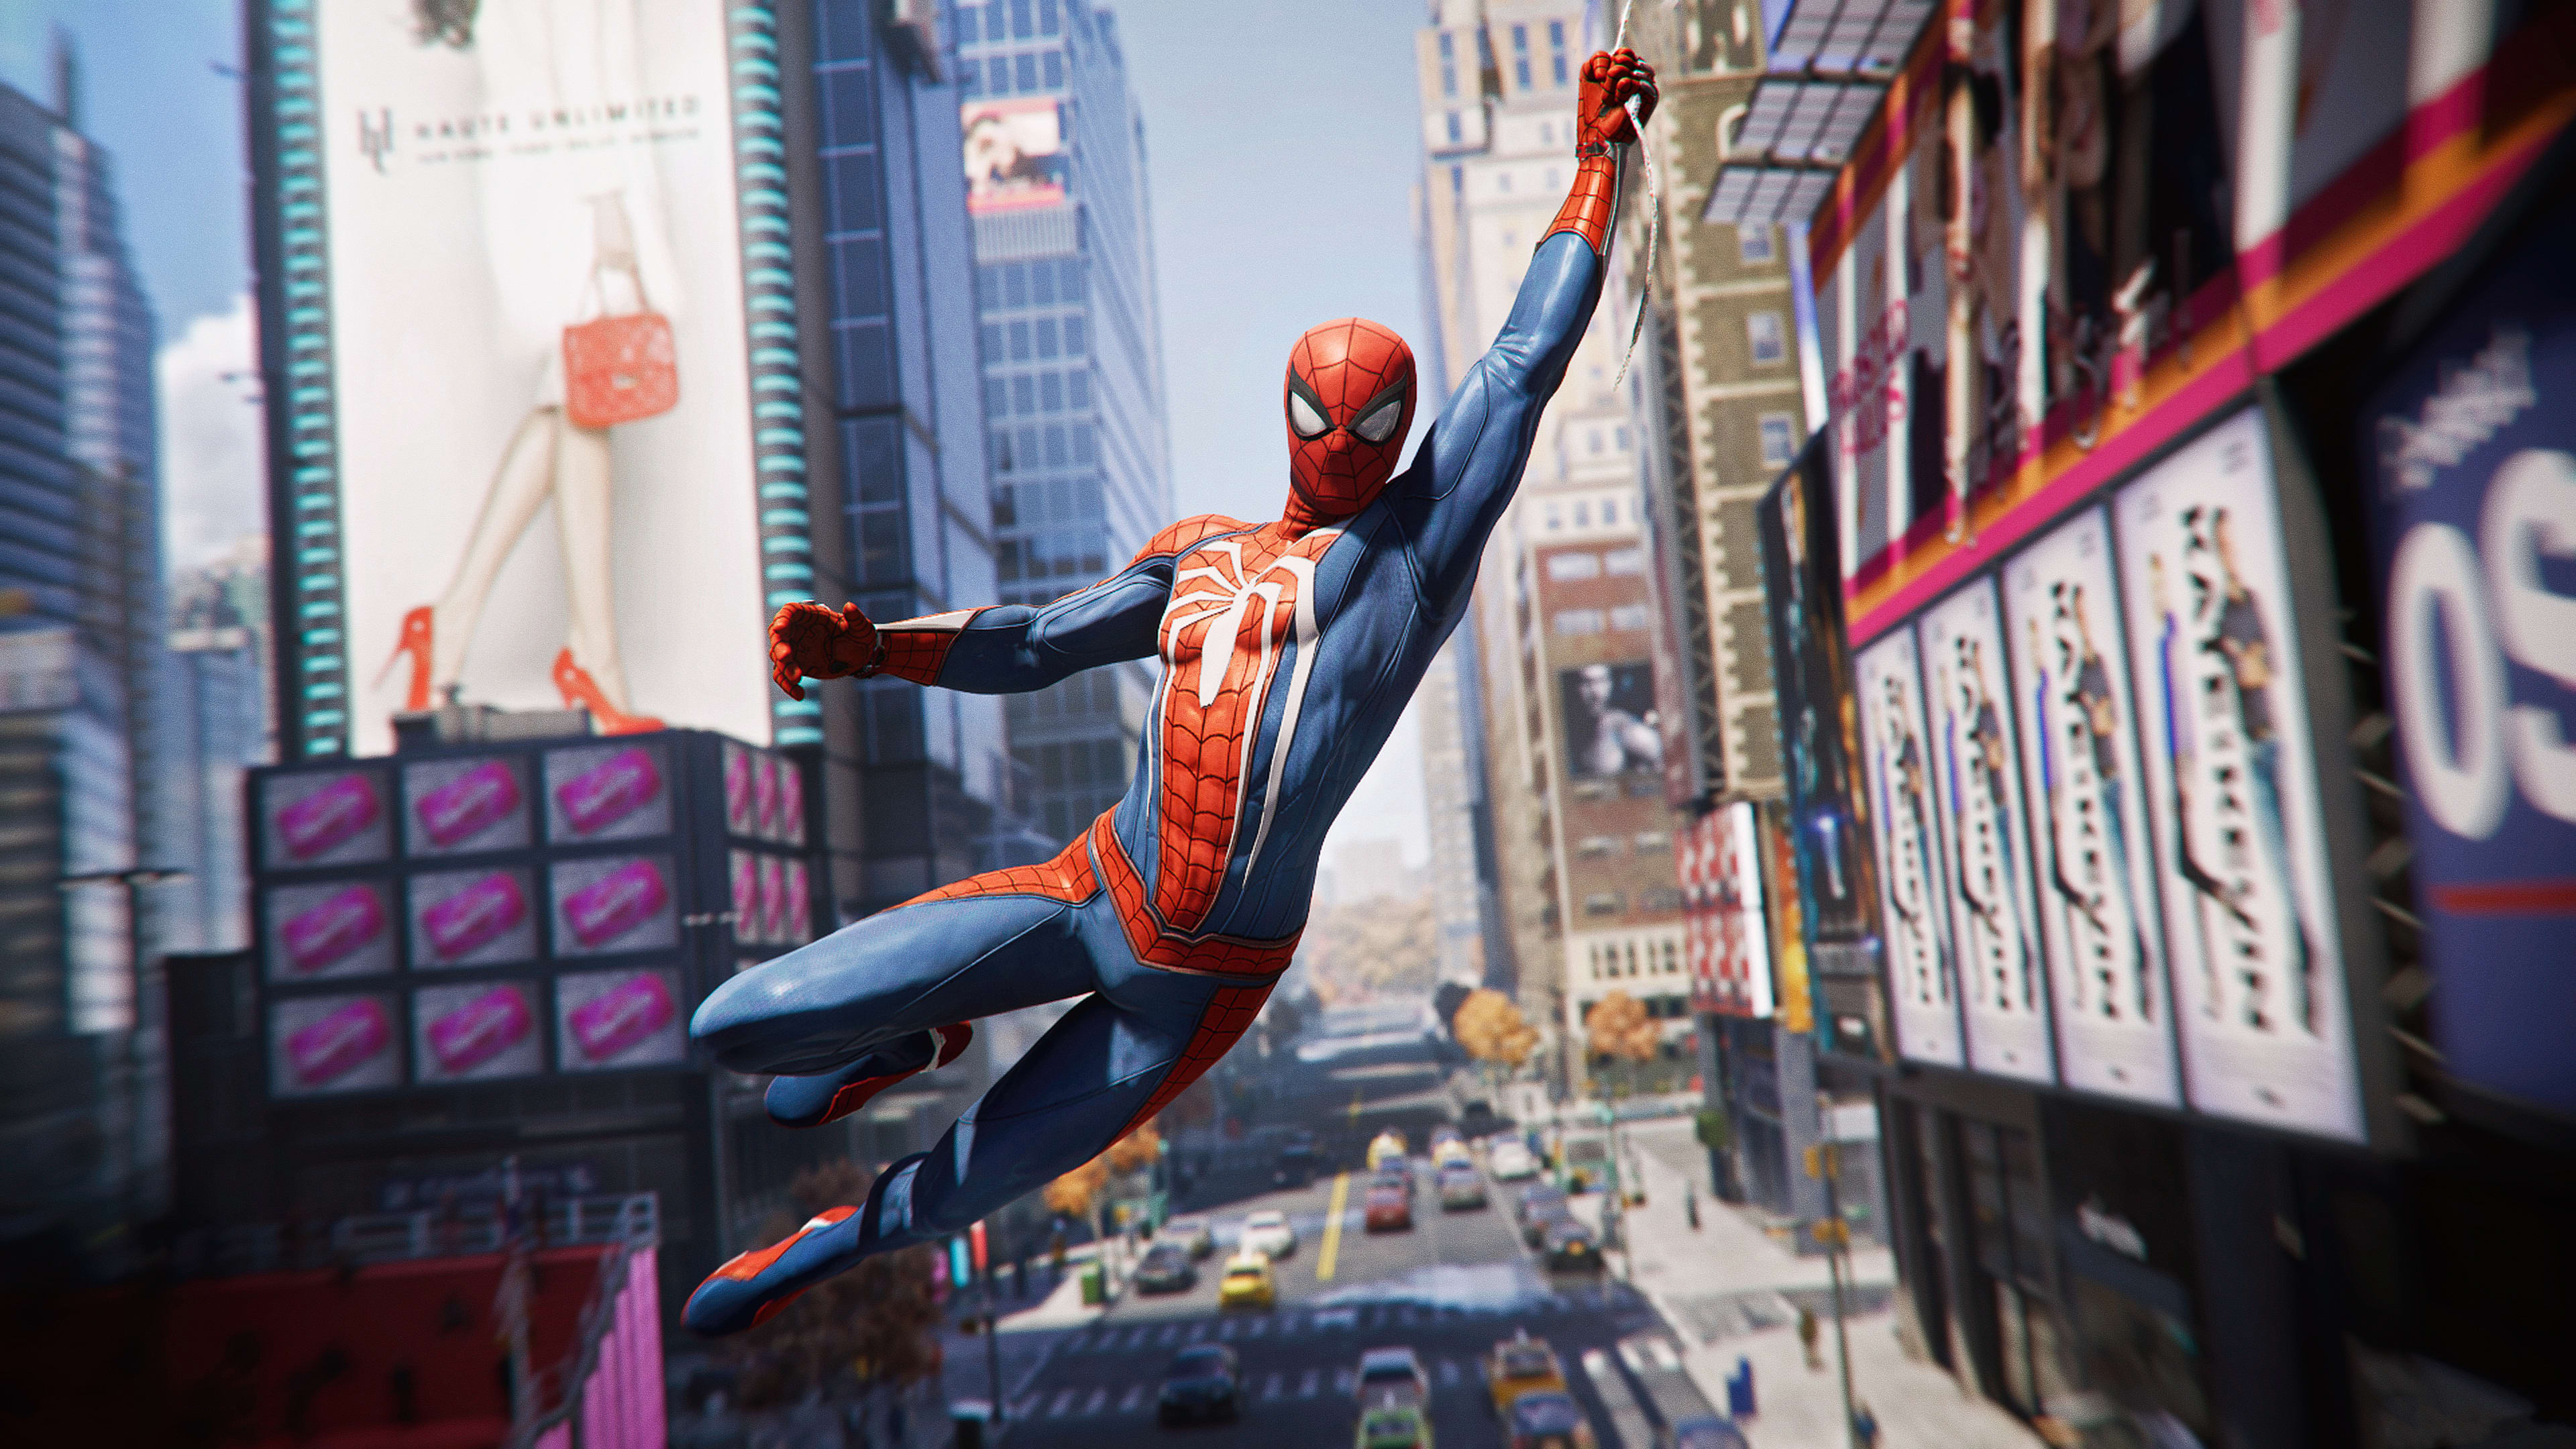 Spider Man from the video game wallpaper 3840x2160